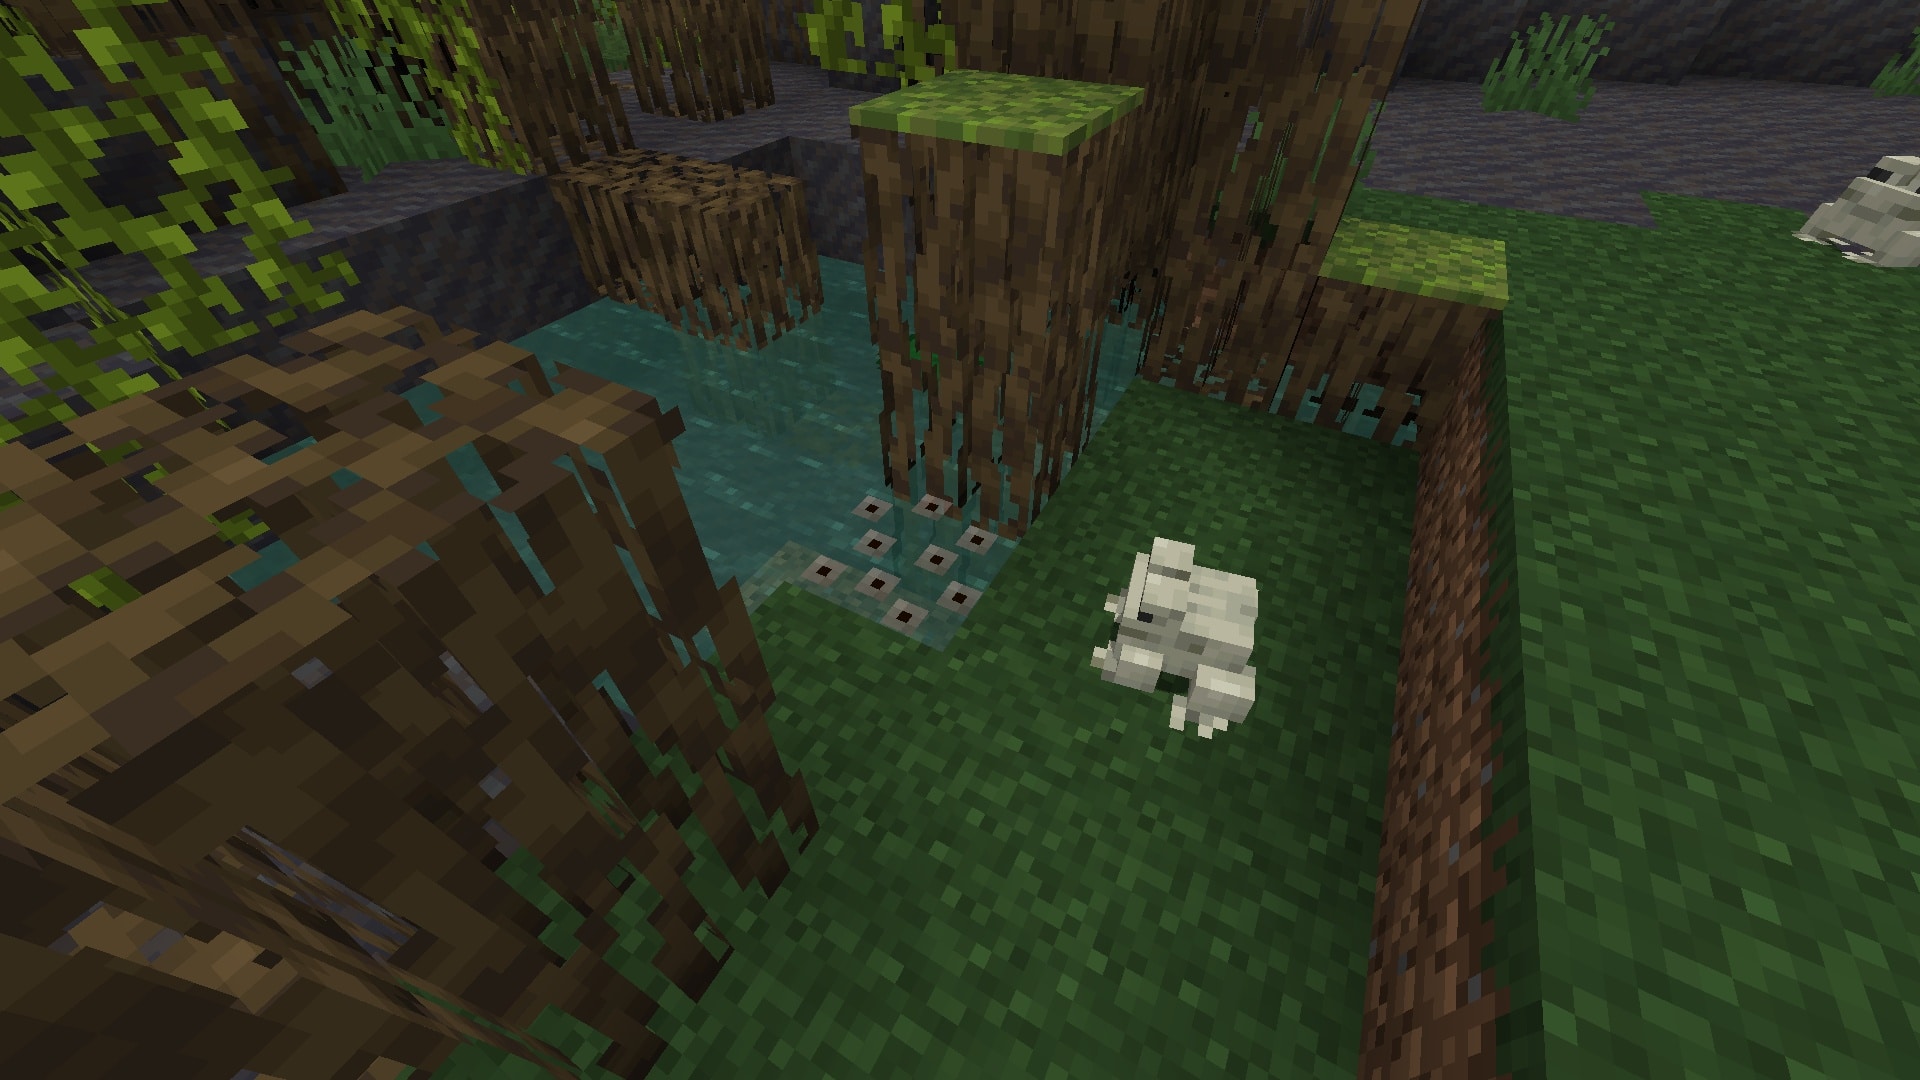 (A frog has laid its spawn in this pond nice details like this add to the atmosphere)